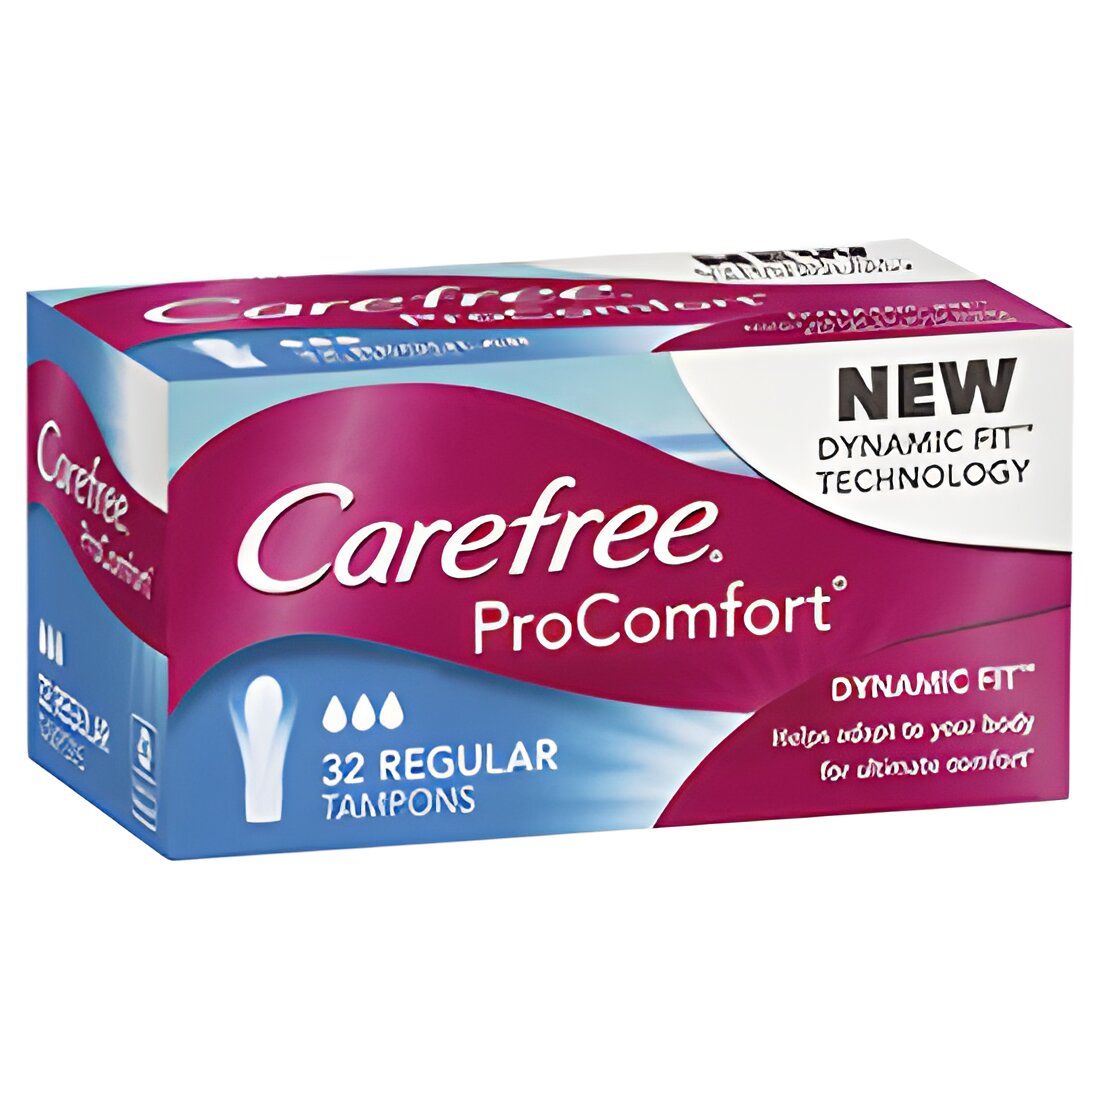 Free Tampon Samples From Carefree Australia